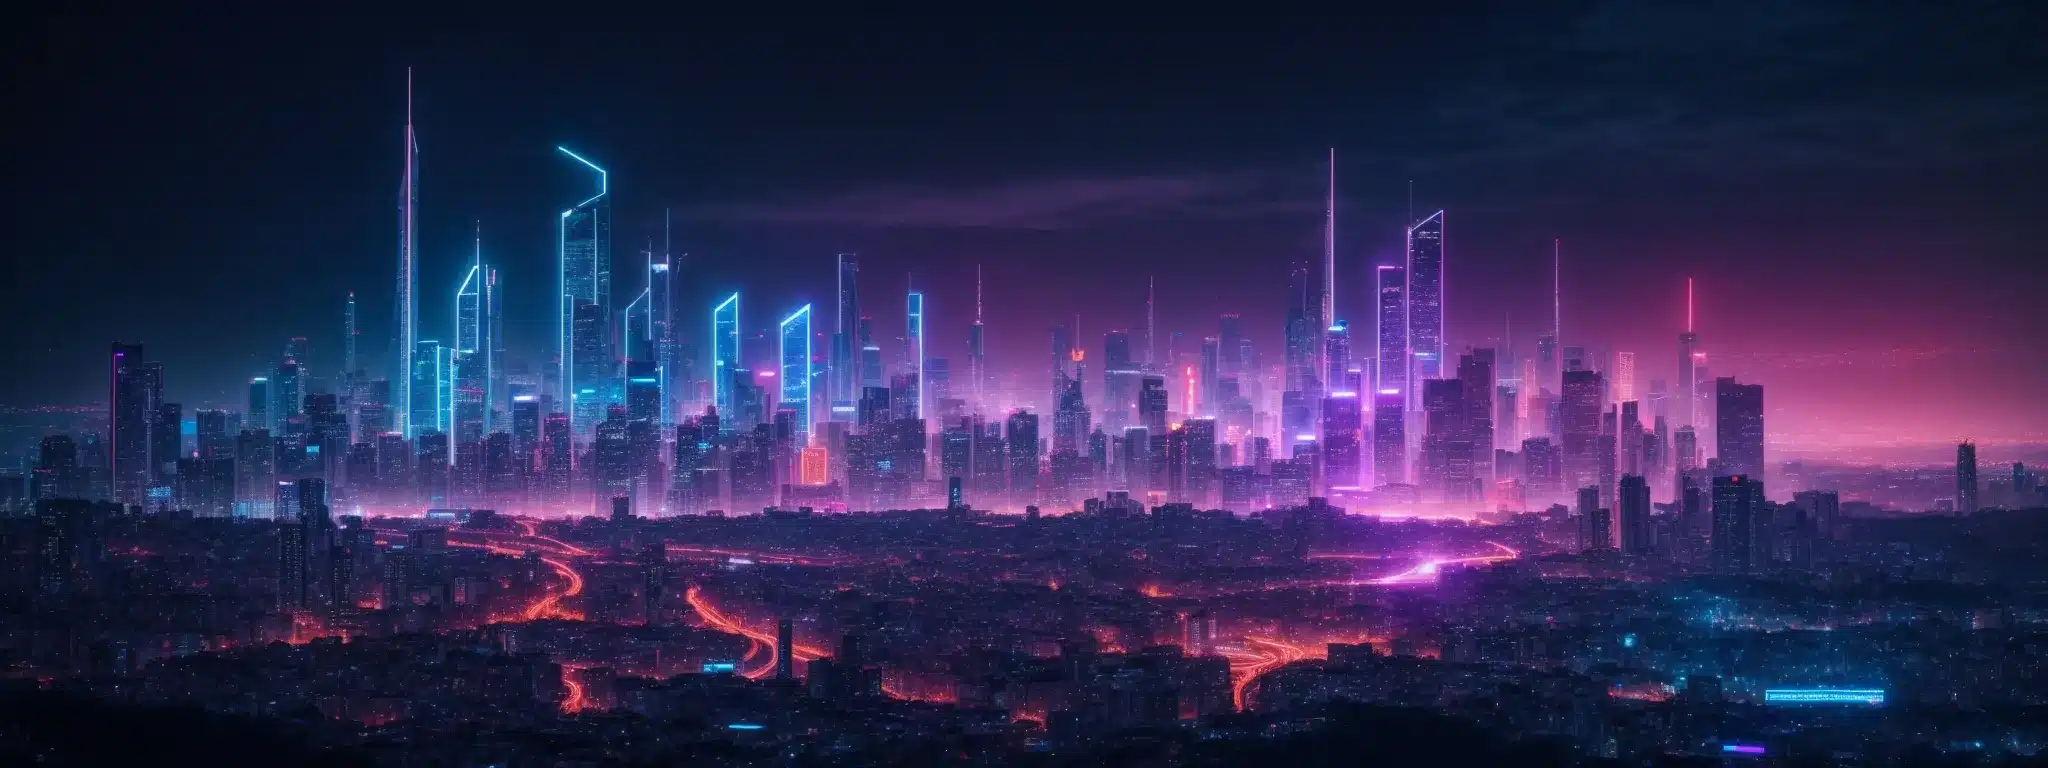 A Futuristic City Skyline Illuminated By Neon Lights Against A Night Sky, Symbolizing The Cutting-Edge Frontier Of Technological Advancement.